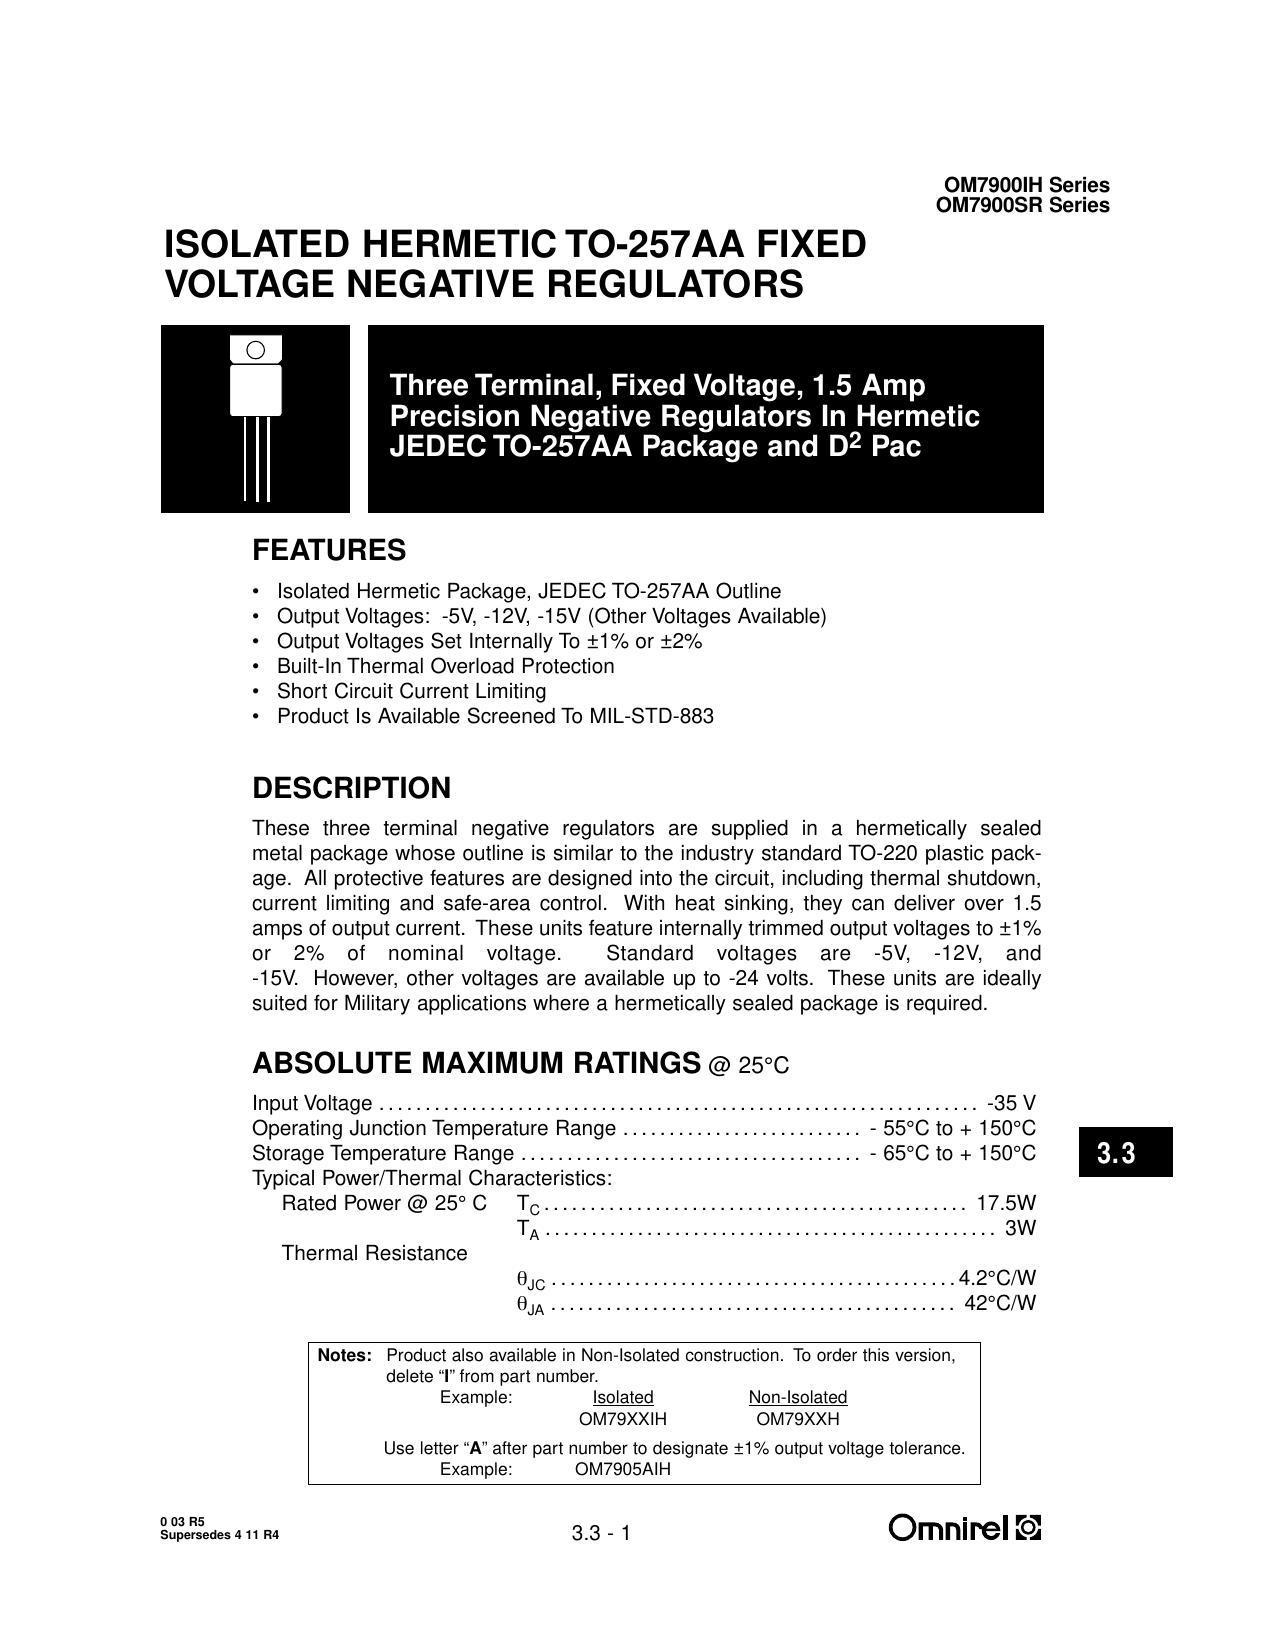 omz9ooih-series-omz9oosr-series-isolated-hermetic-to-257aa-fixed-voltage-negative-regulators.pdf